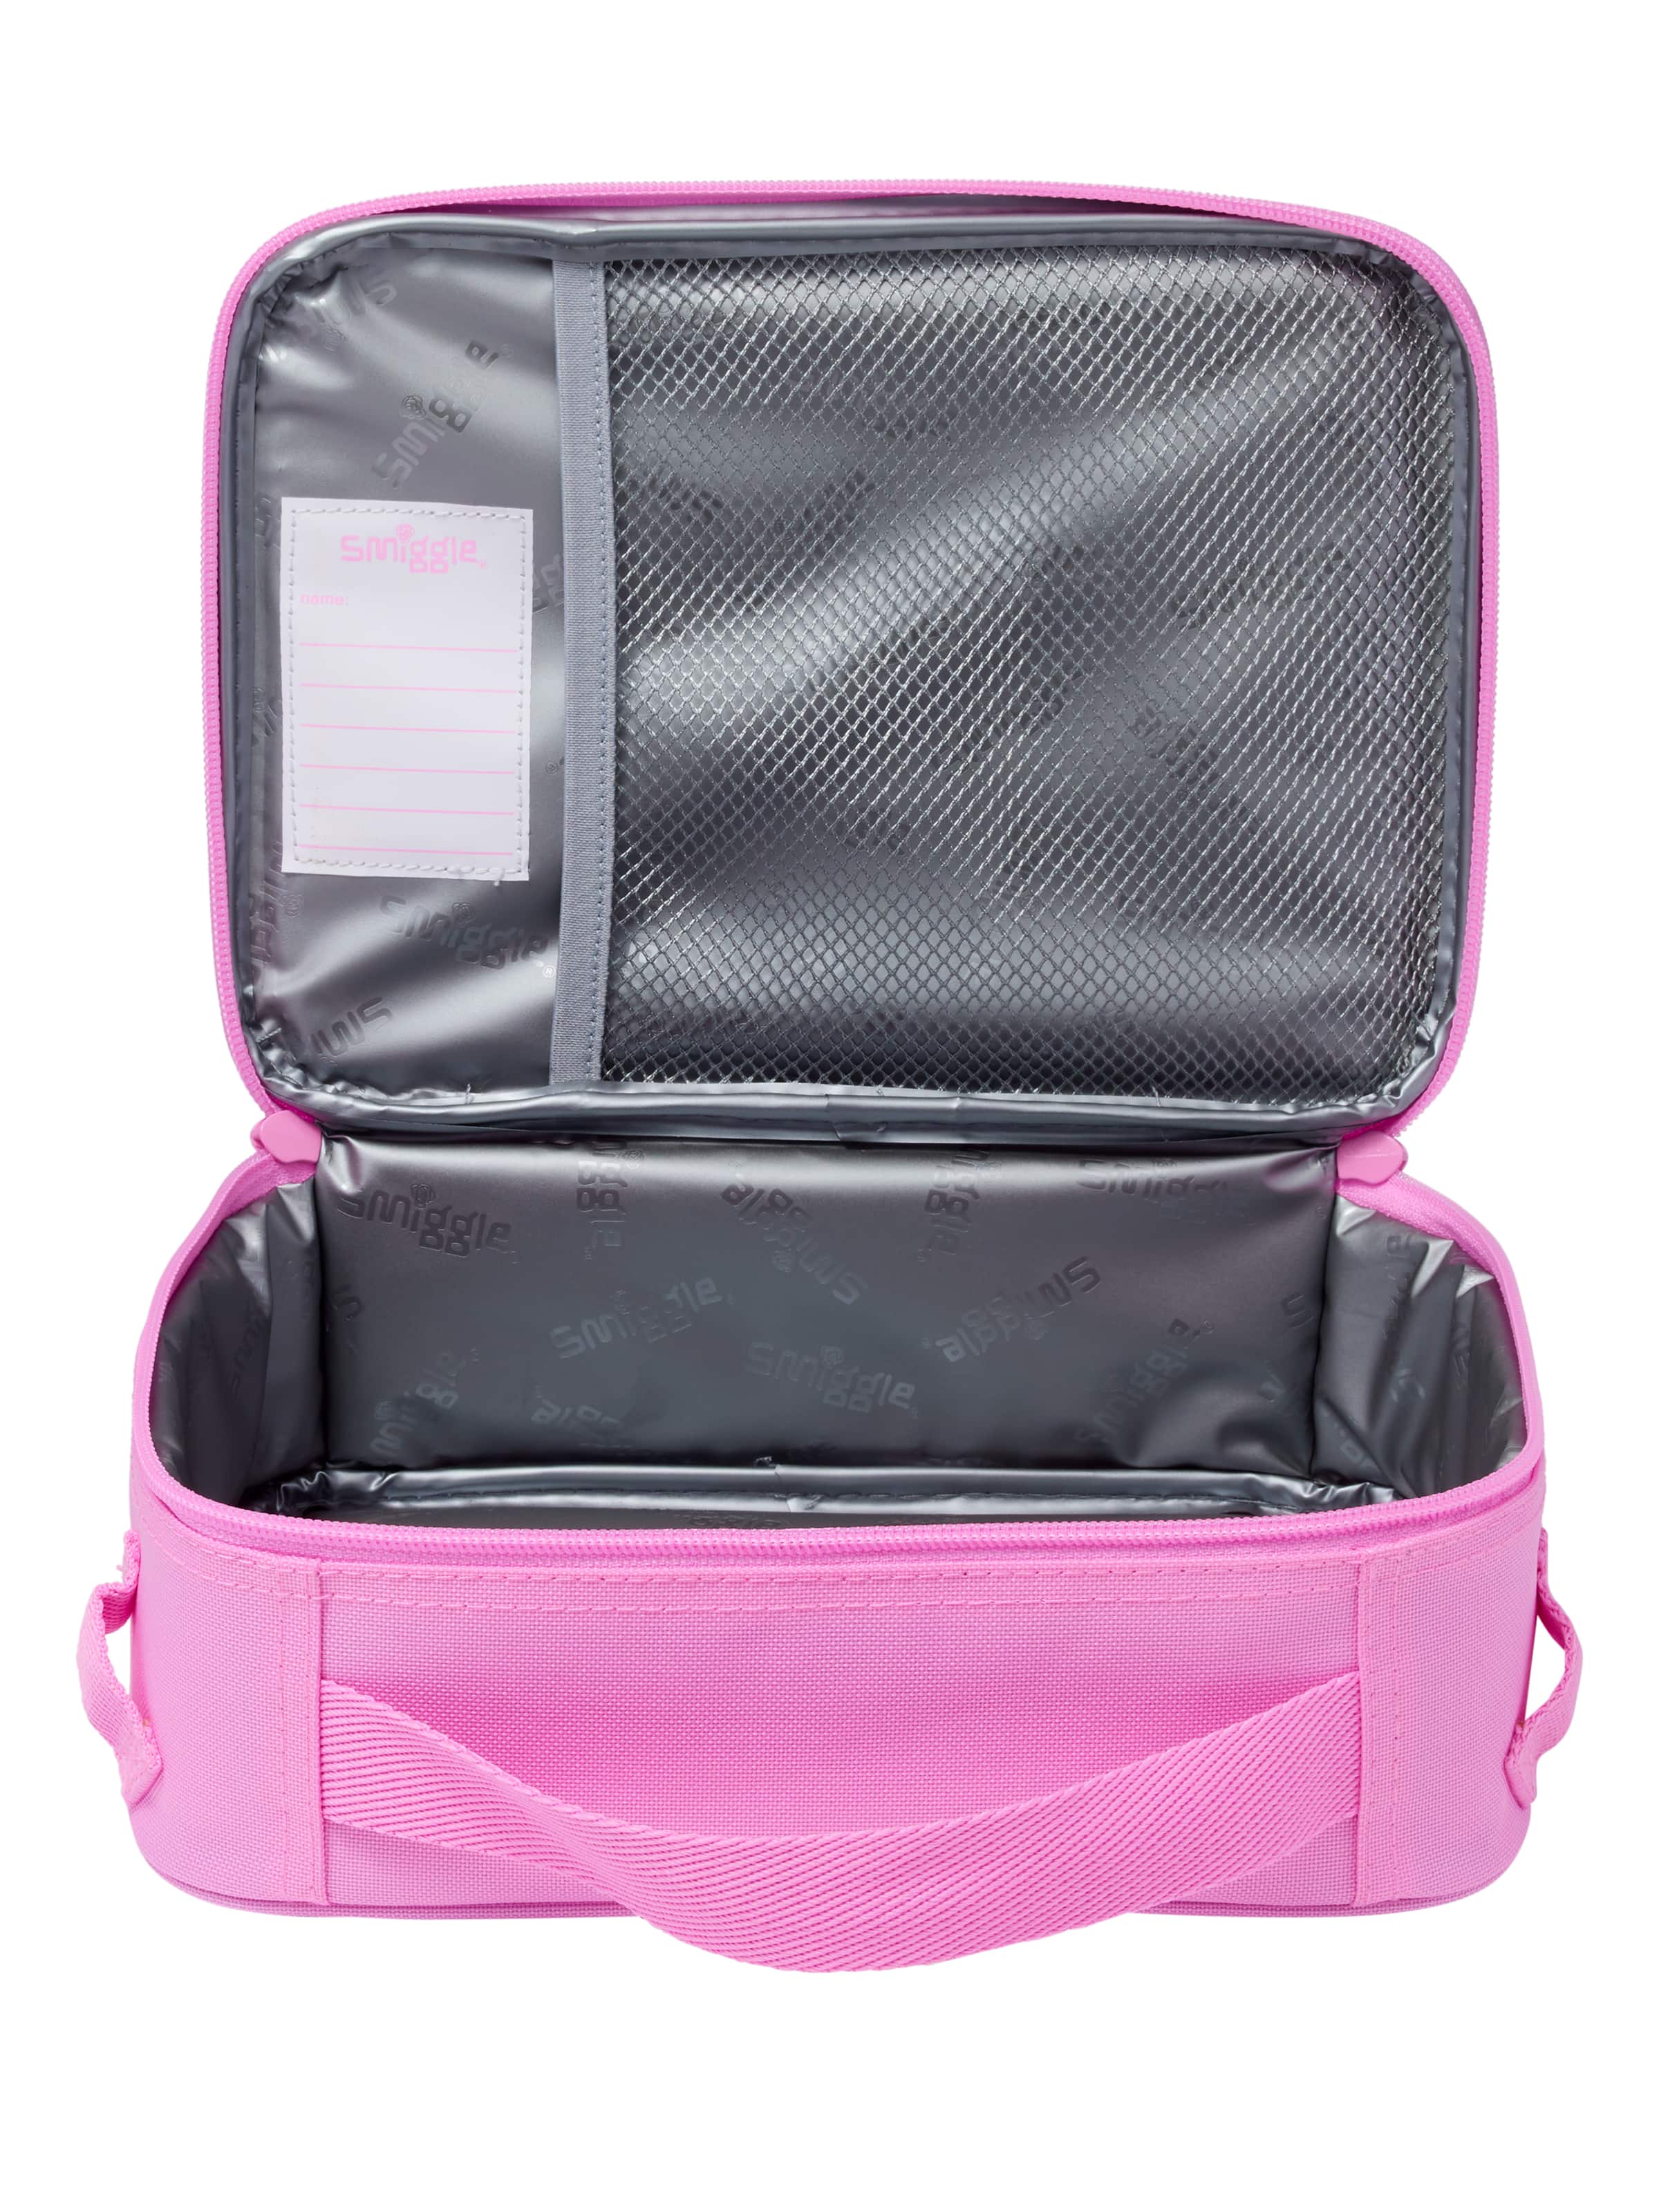 Kids Lunch Boxes - Insulated Lunch Boxes & Lunch Bags